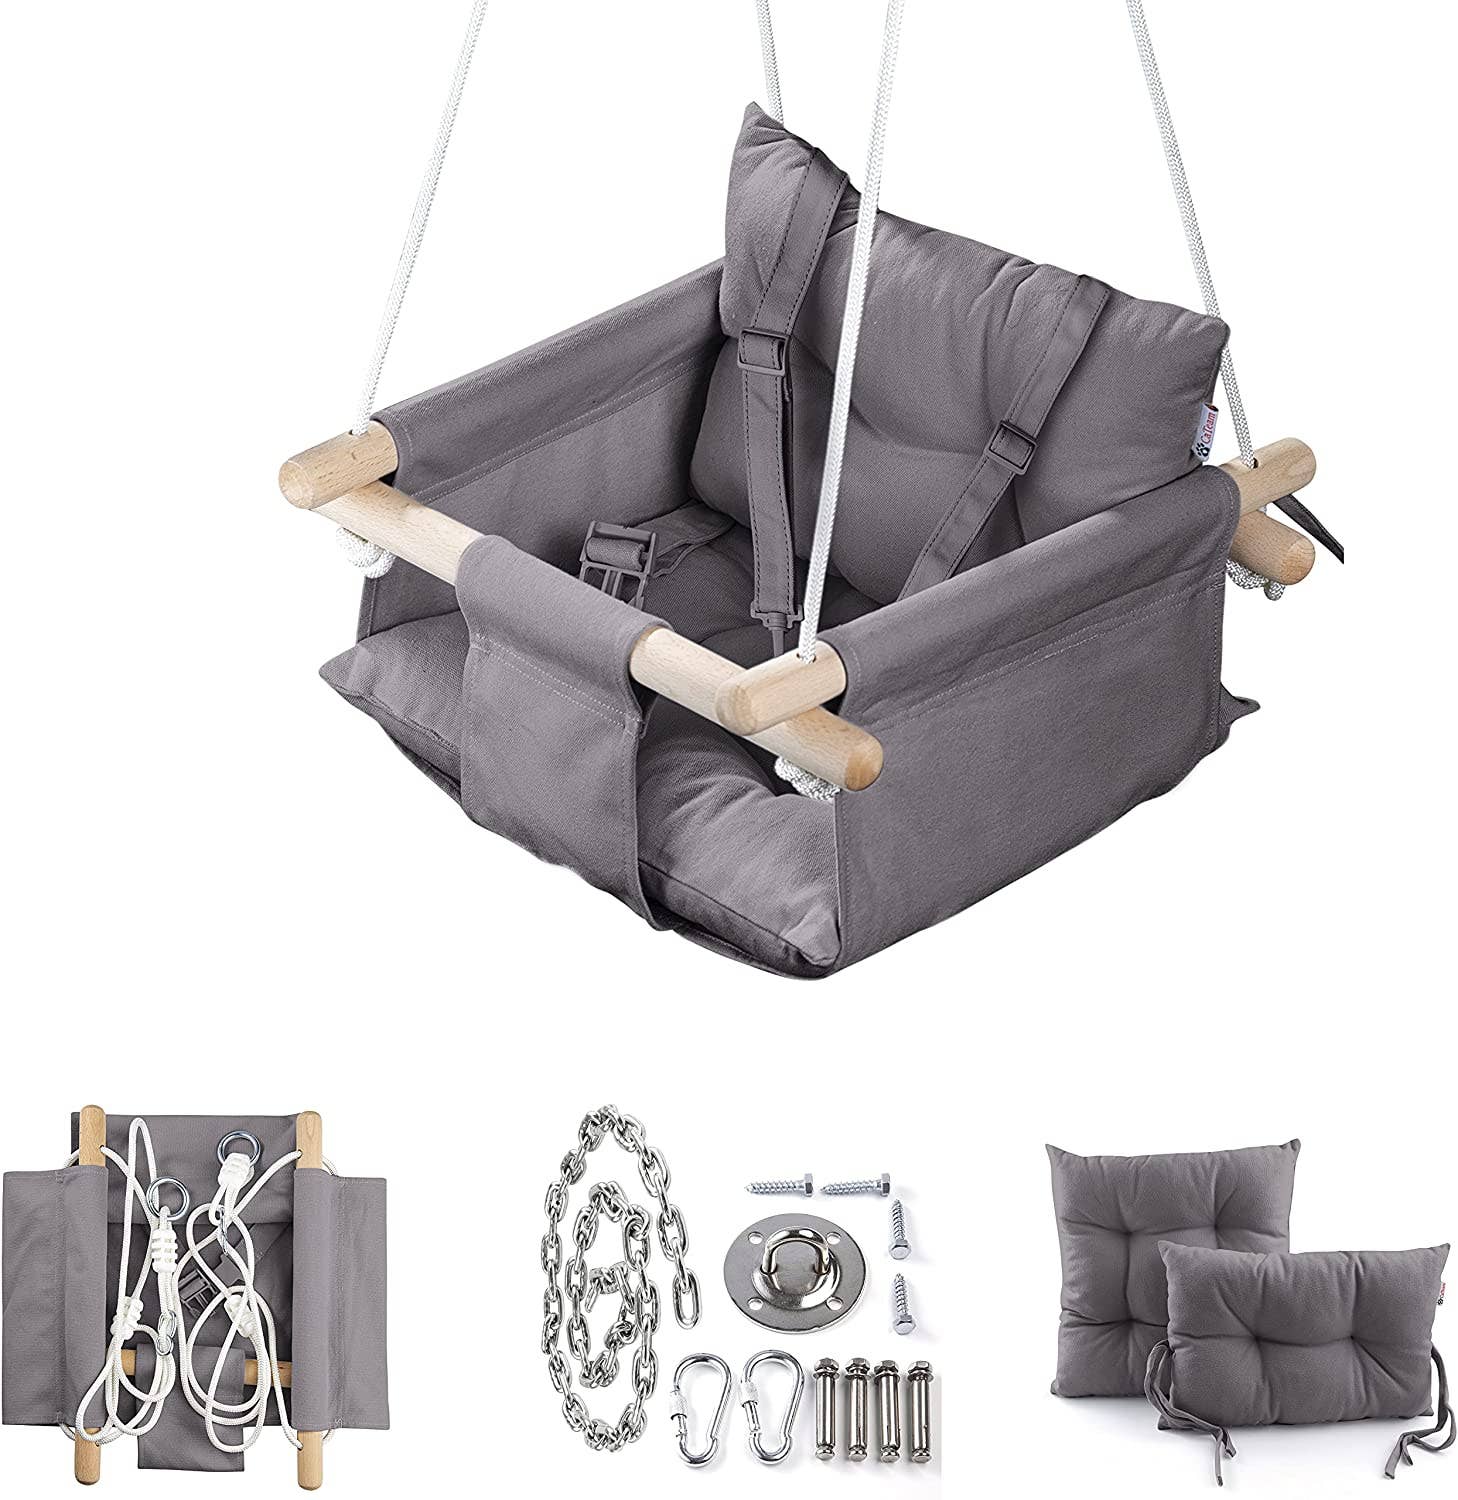 A display of the Canvas Baby Swing with the accompanying pillows and hanging hardware.